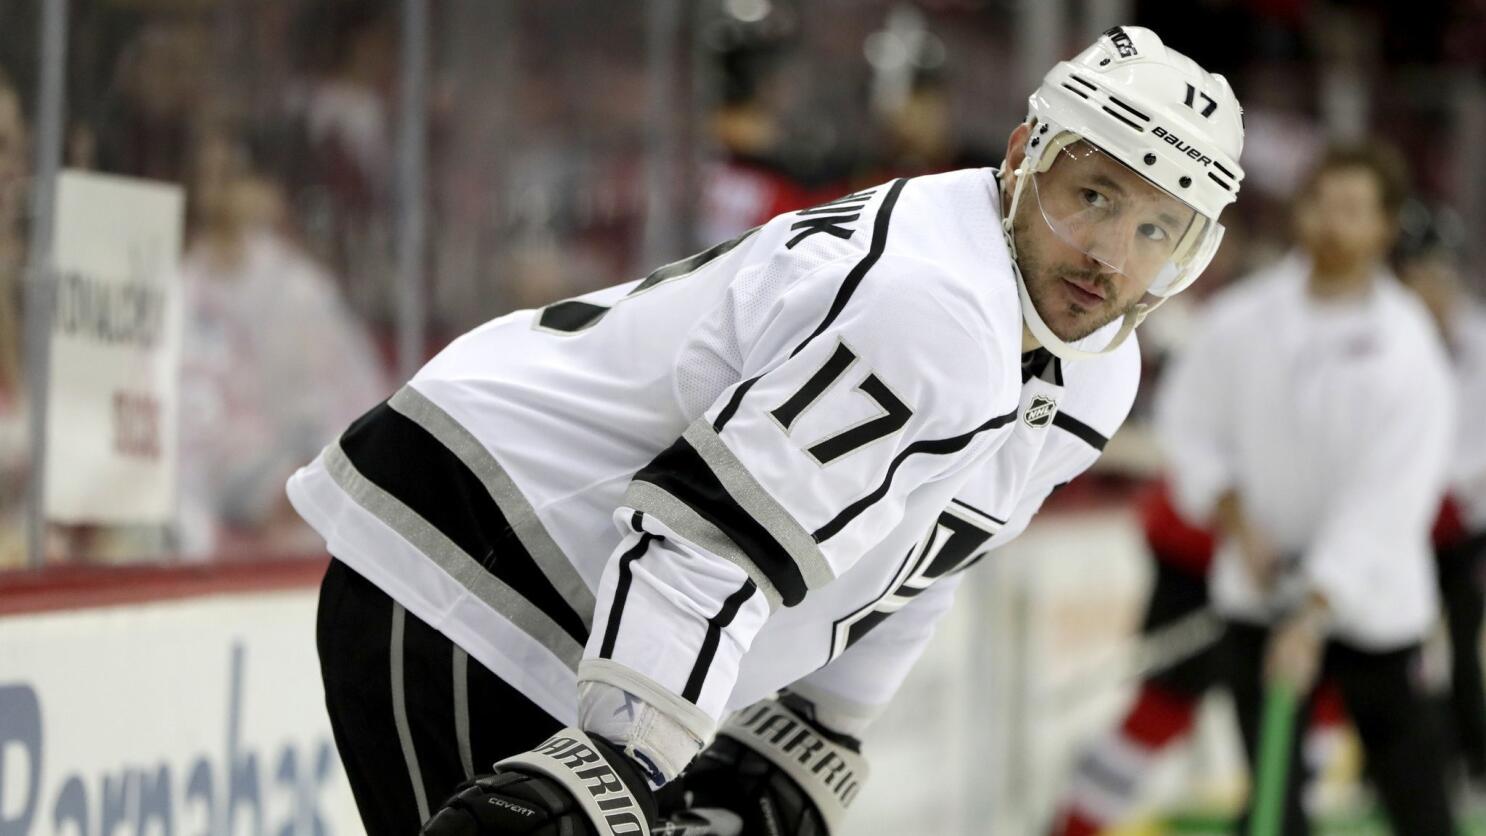 NHL: Why Jeff Carter moved but Rick Nash didn't, NHL